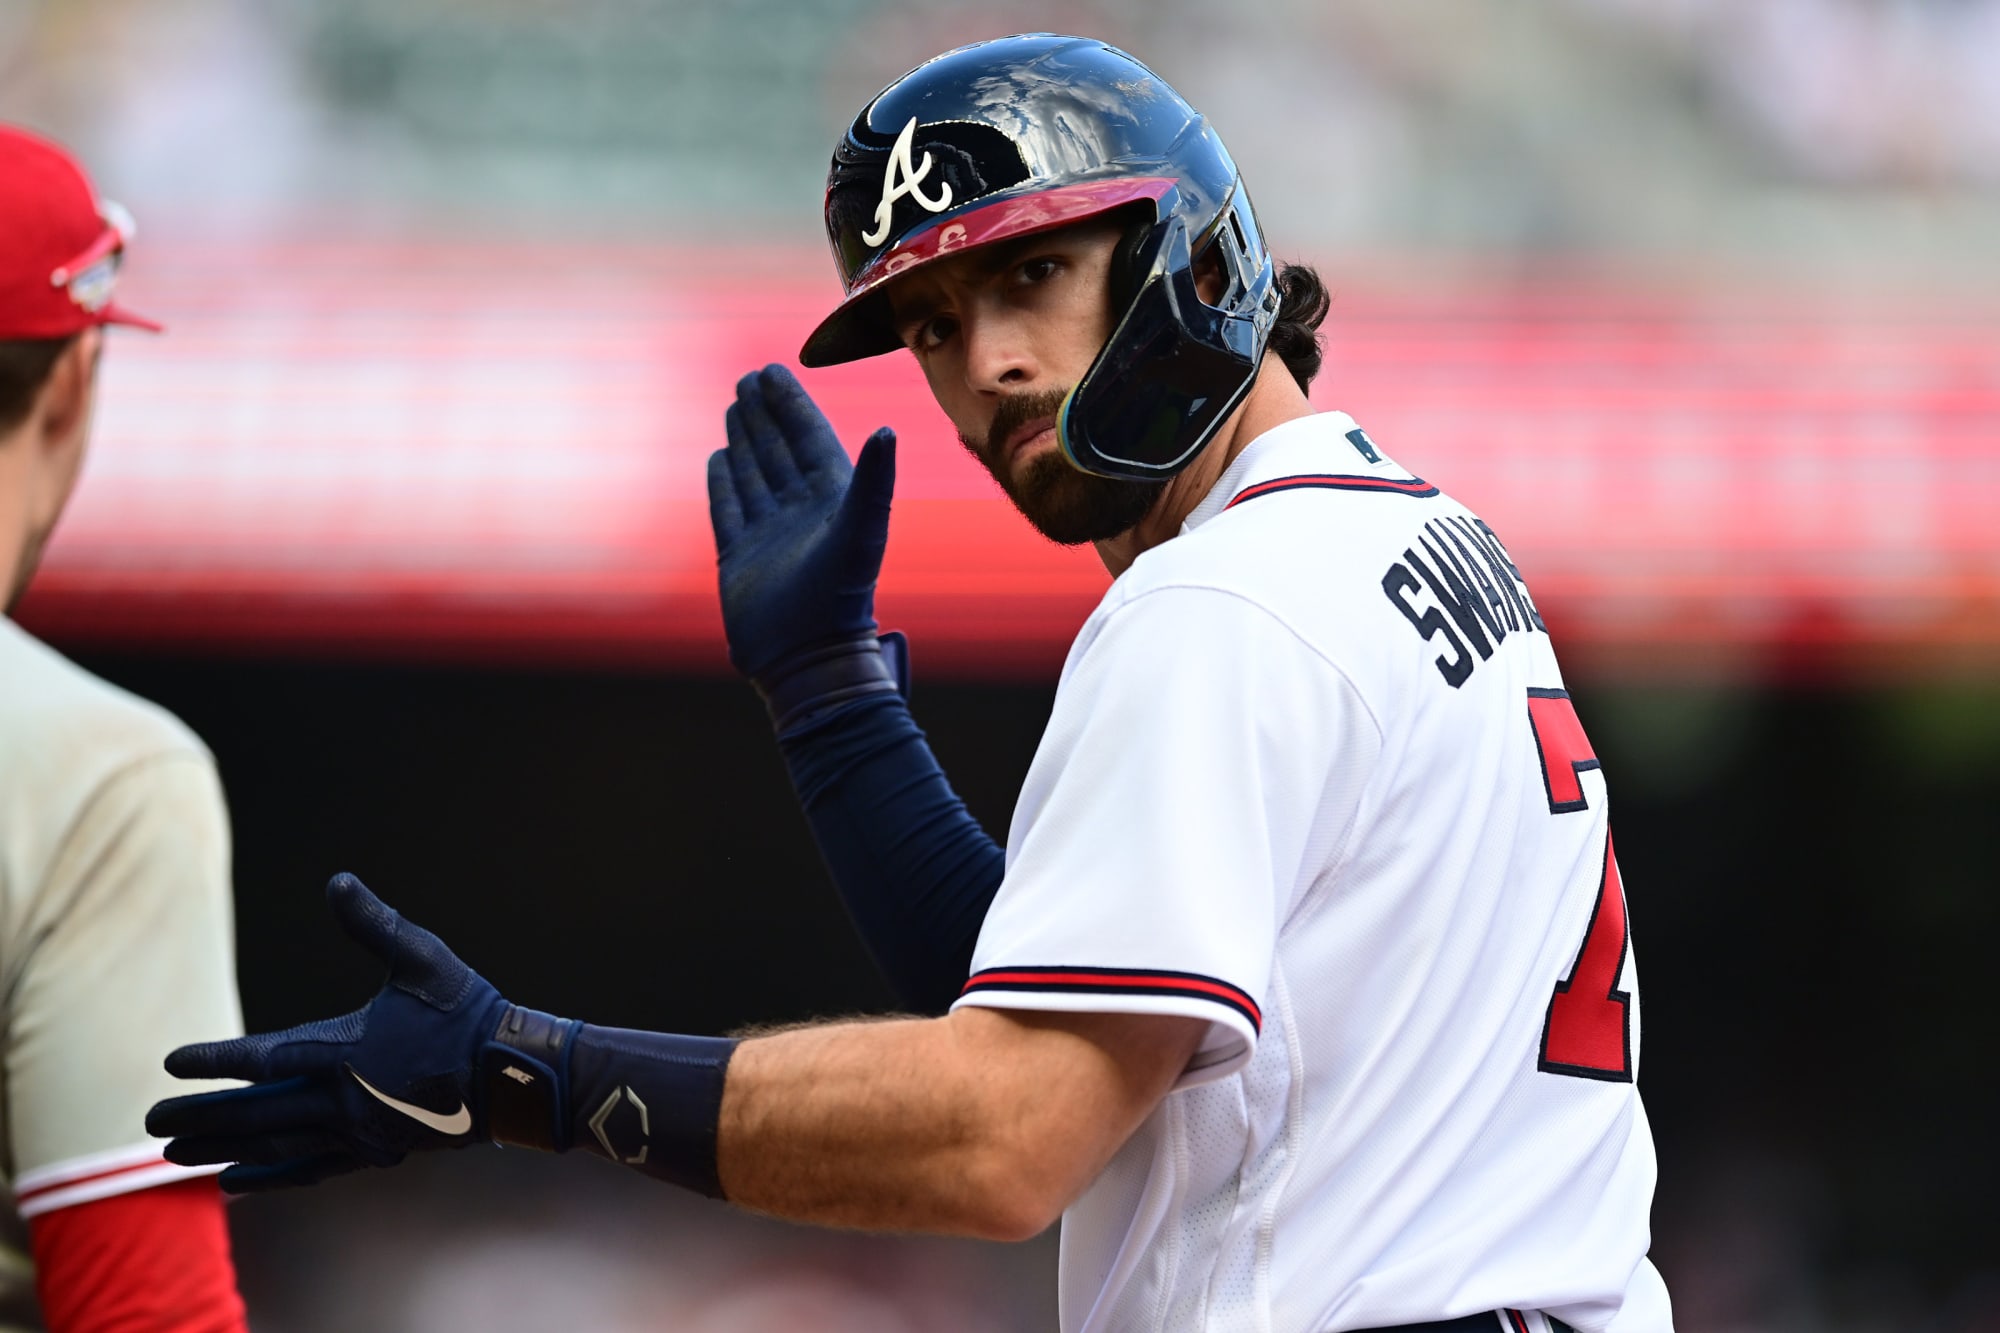 Atlanta Braves players set to free agents after the 2022 Season